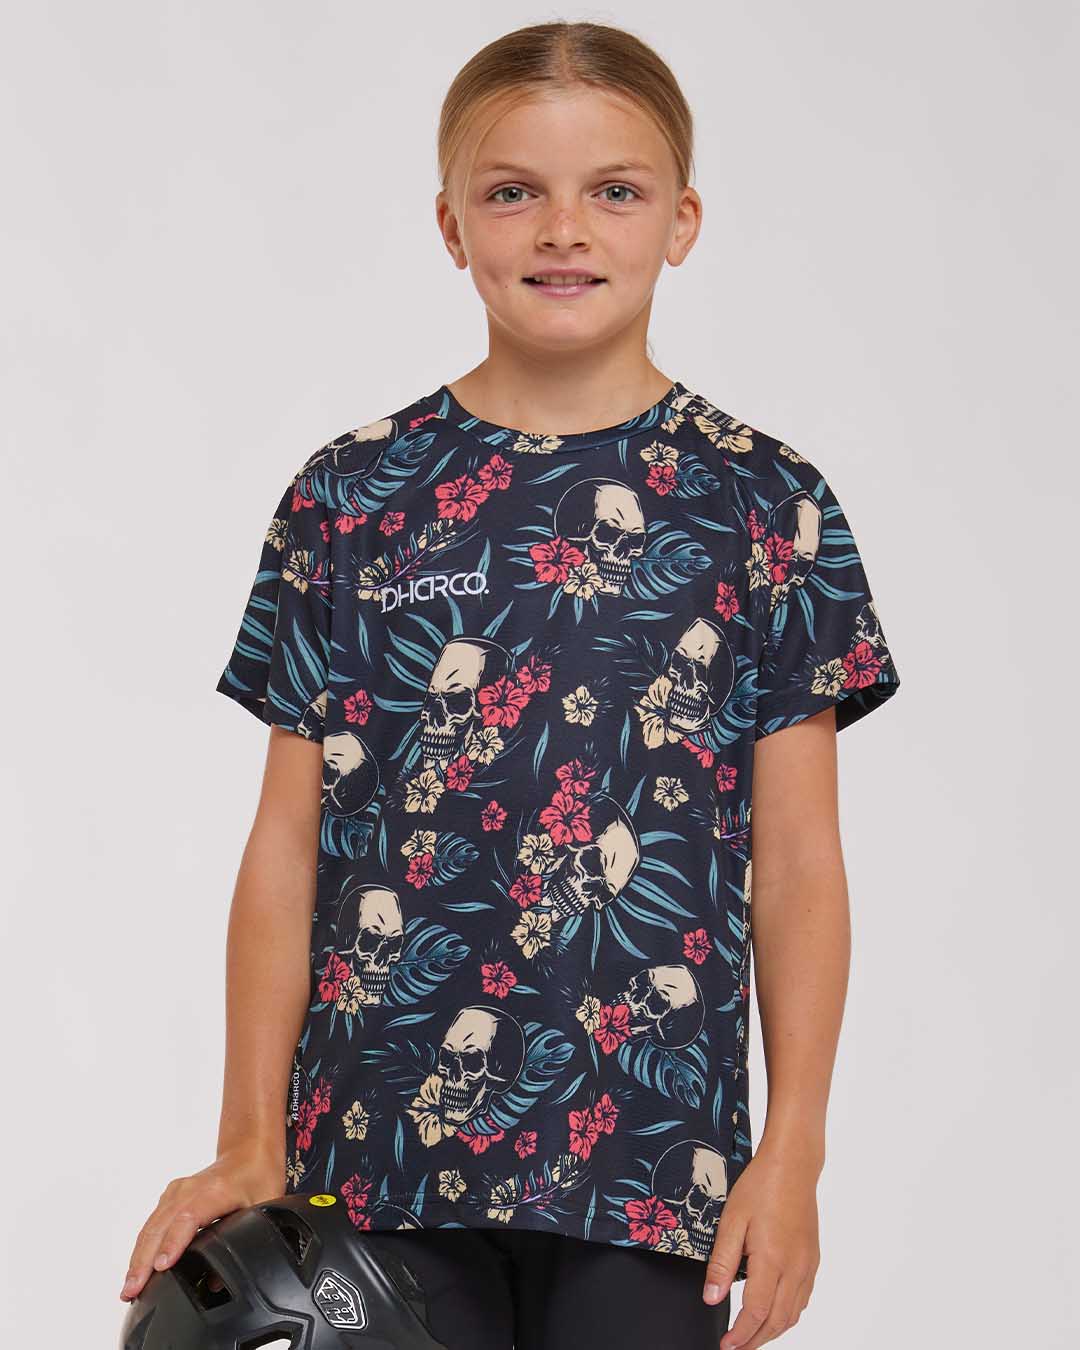 Youth Short Sleeve Jersey | Privateer